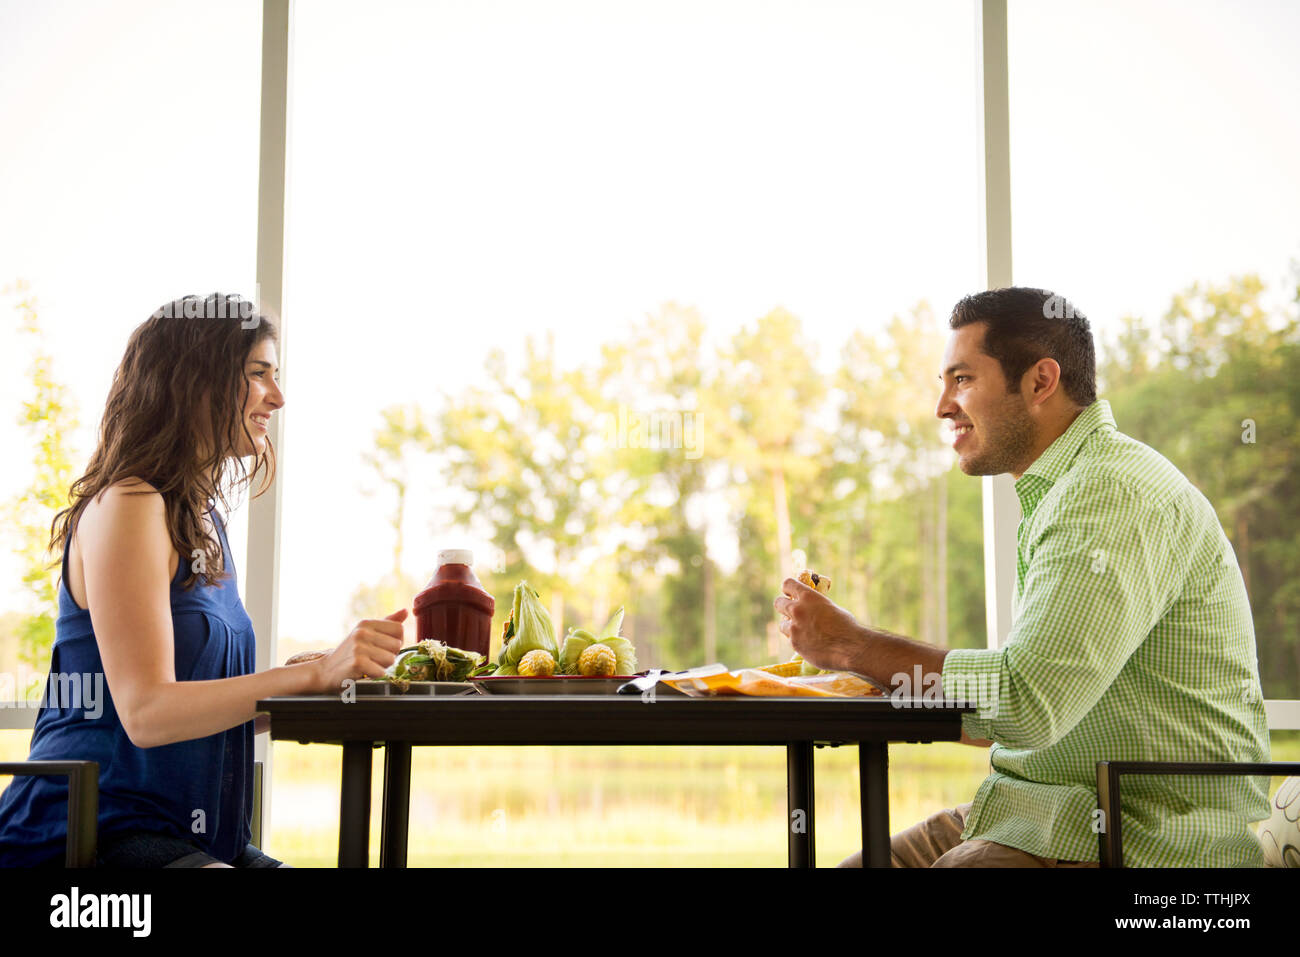 Side view of couple having discussion while eating food at table Stock Photo